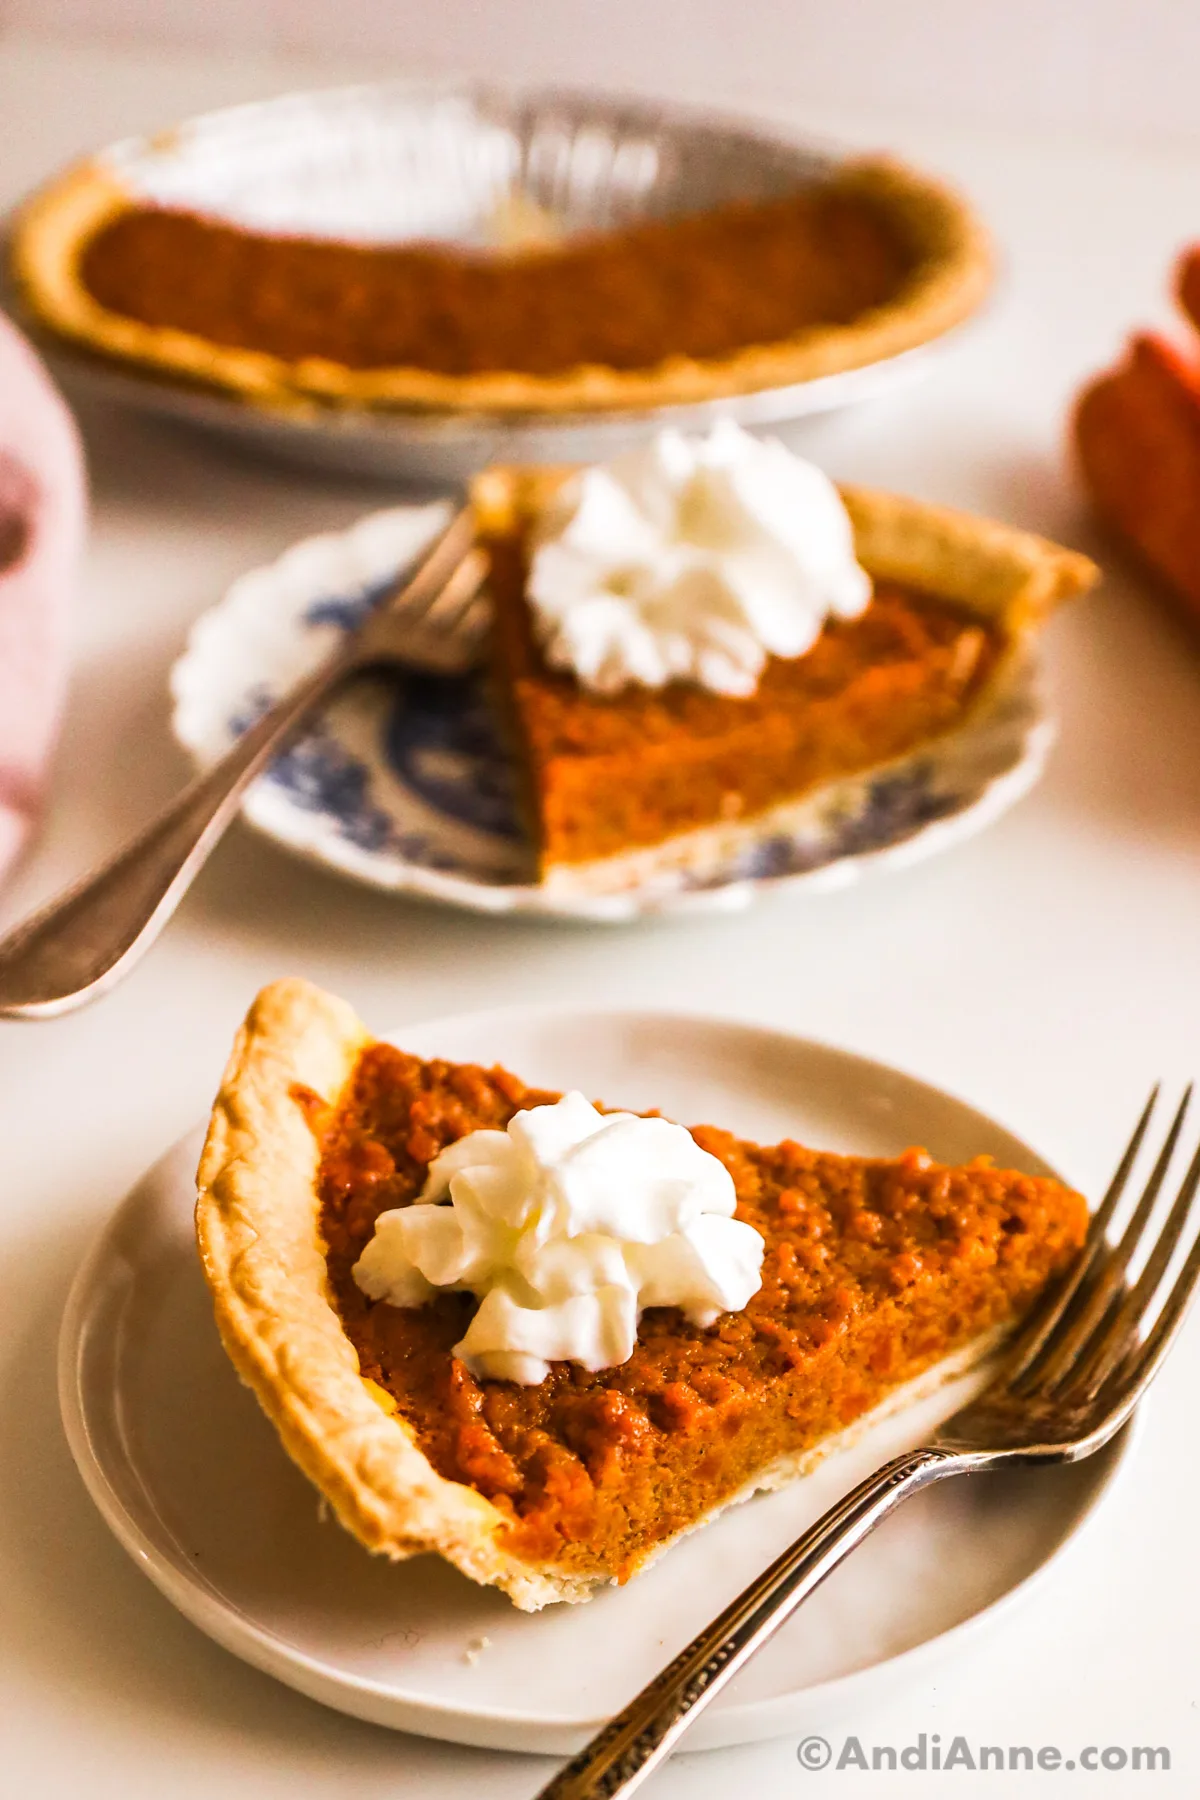 Two slices of carrot pie topped with whipped cream, on plates with forks.